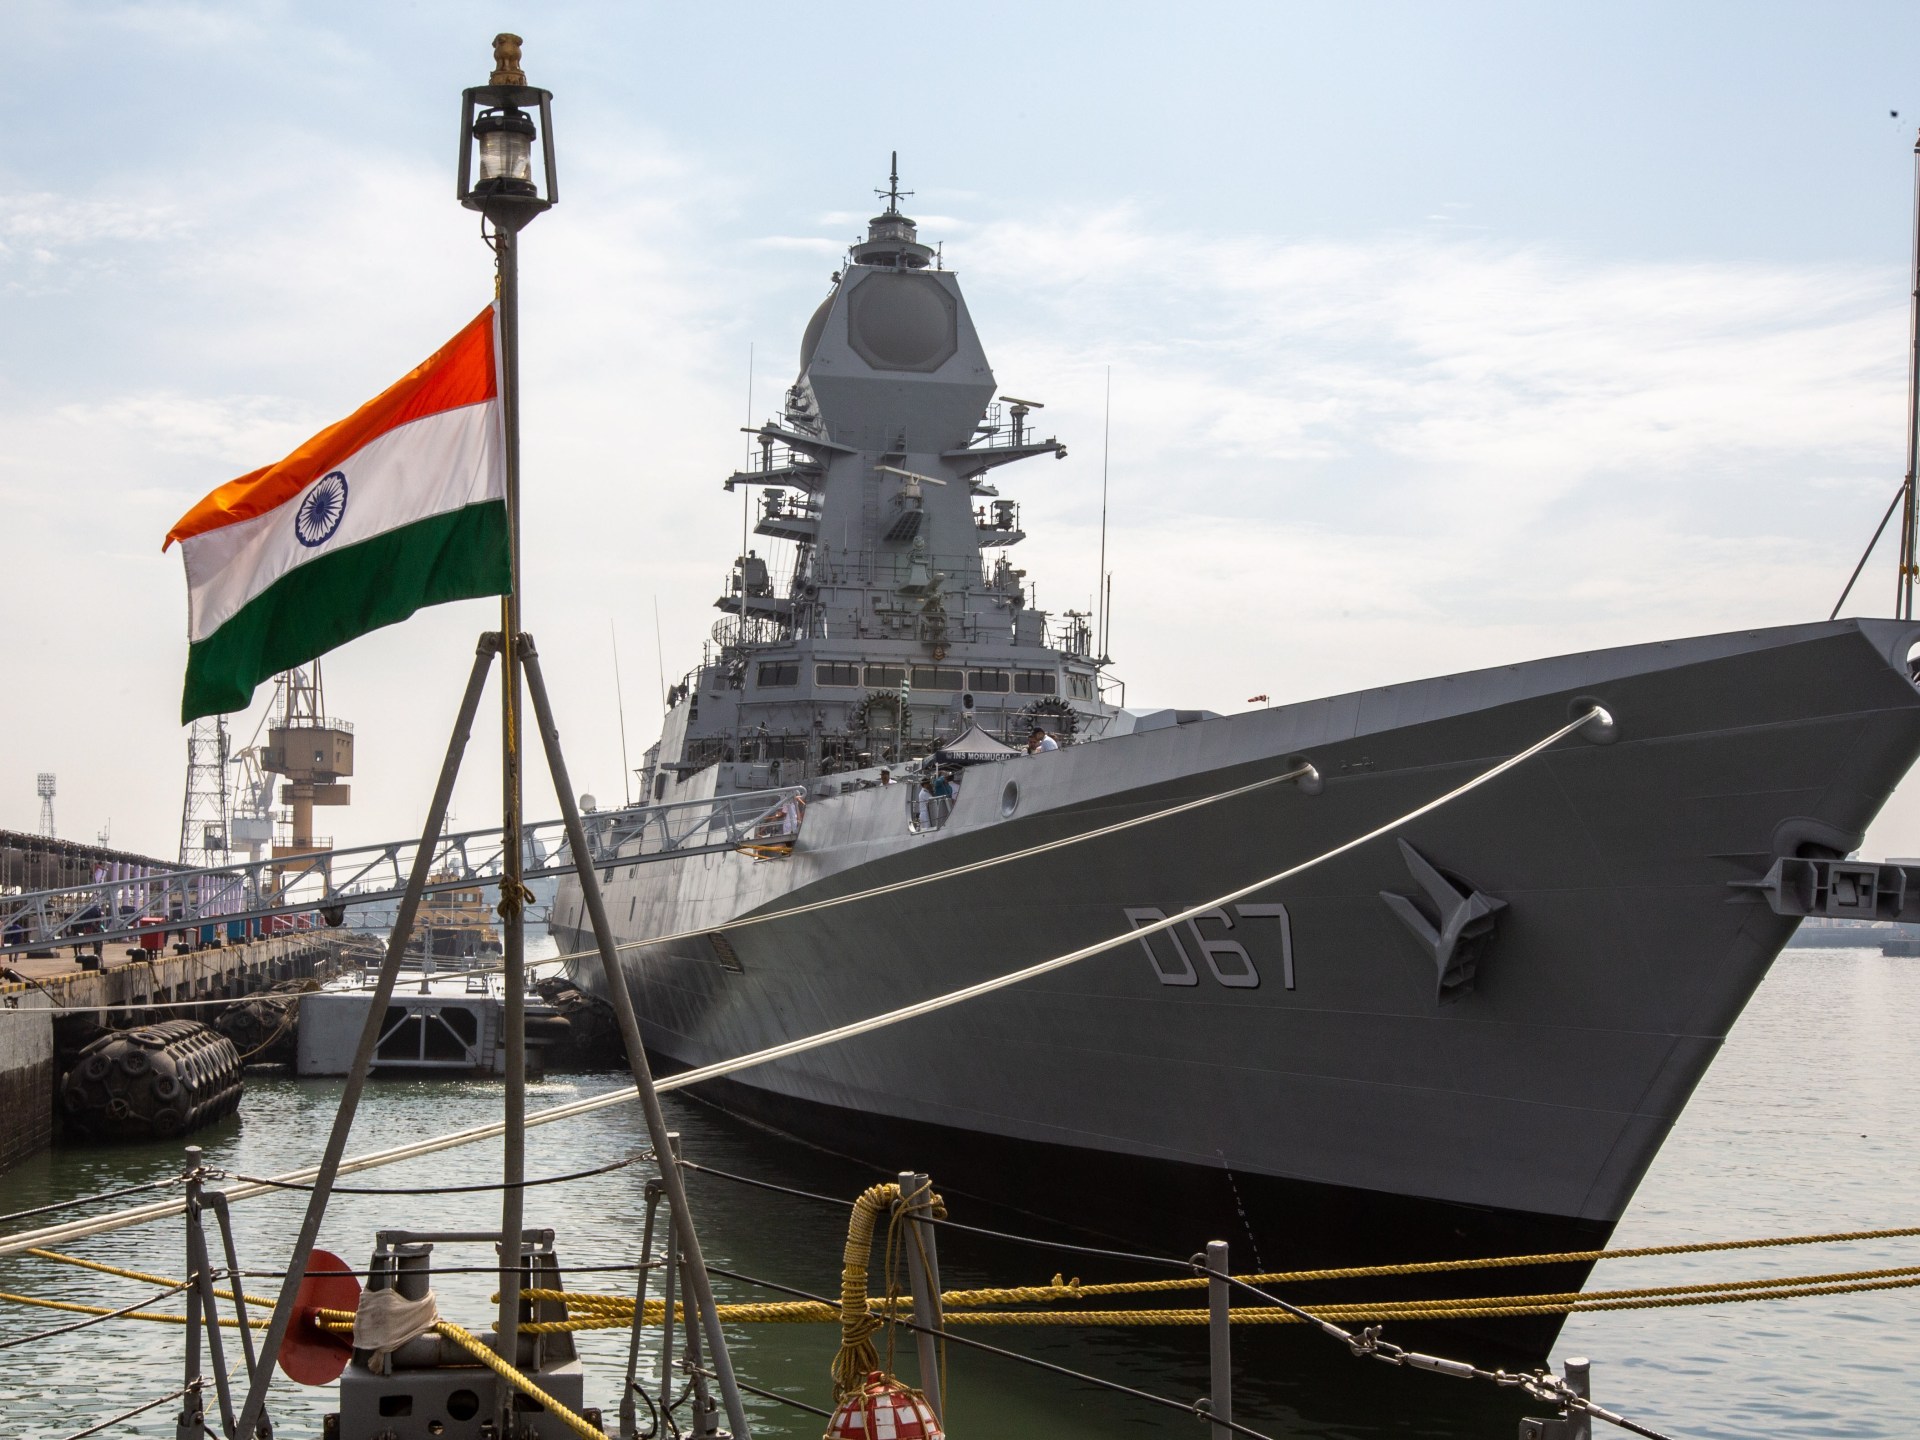 India’s navy deploys warships to Arabian Sea after tanker attack